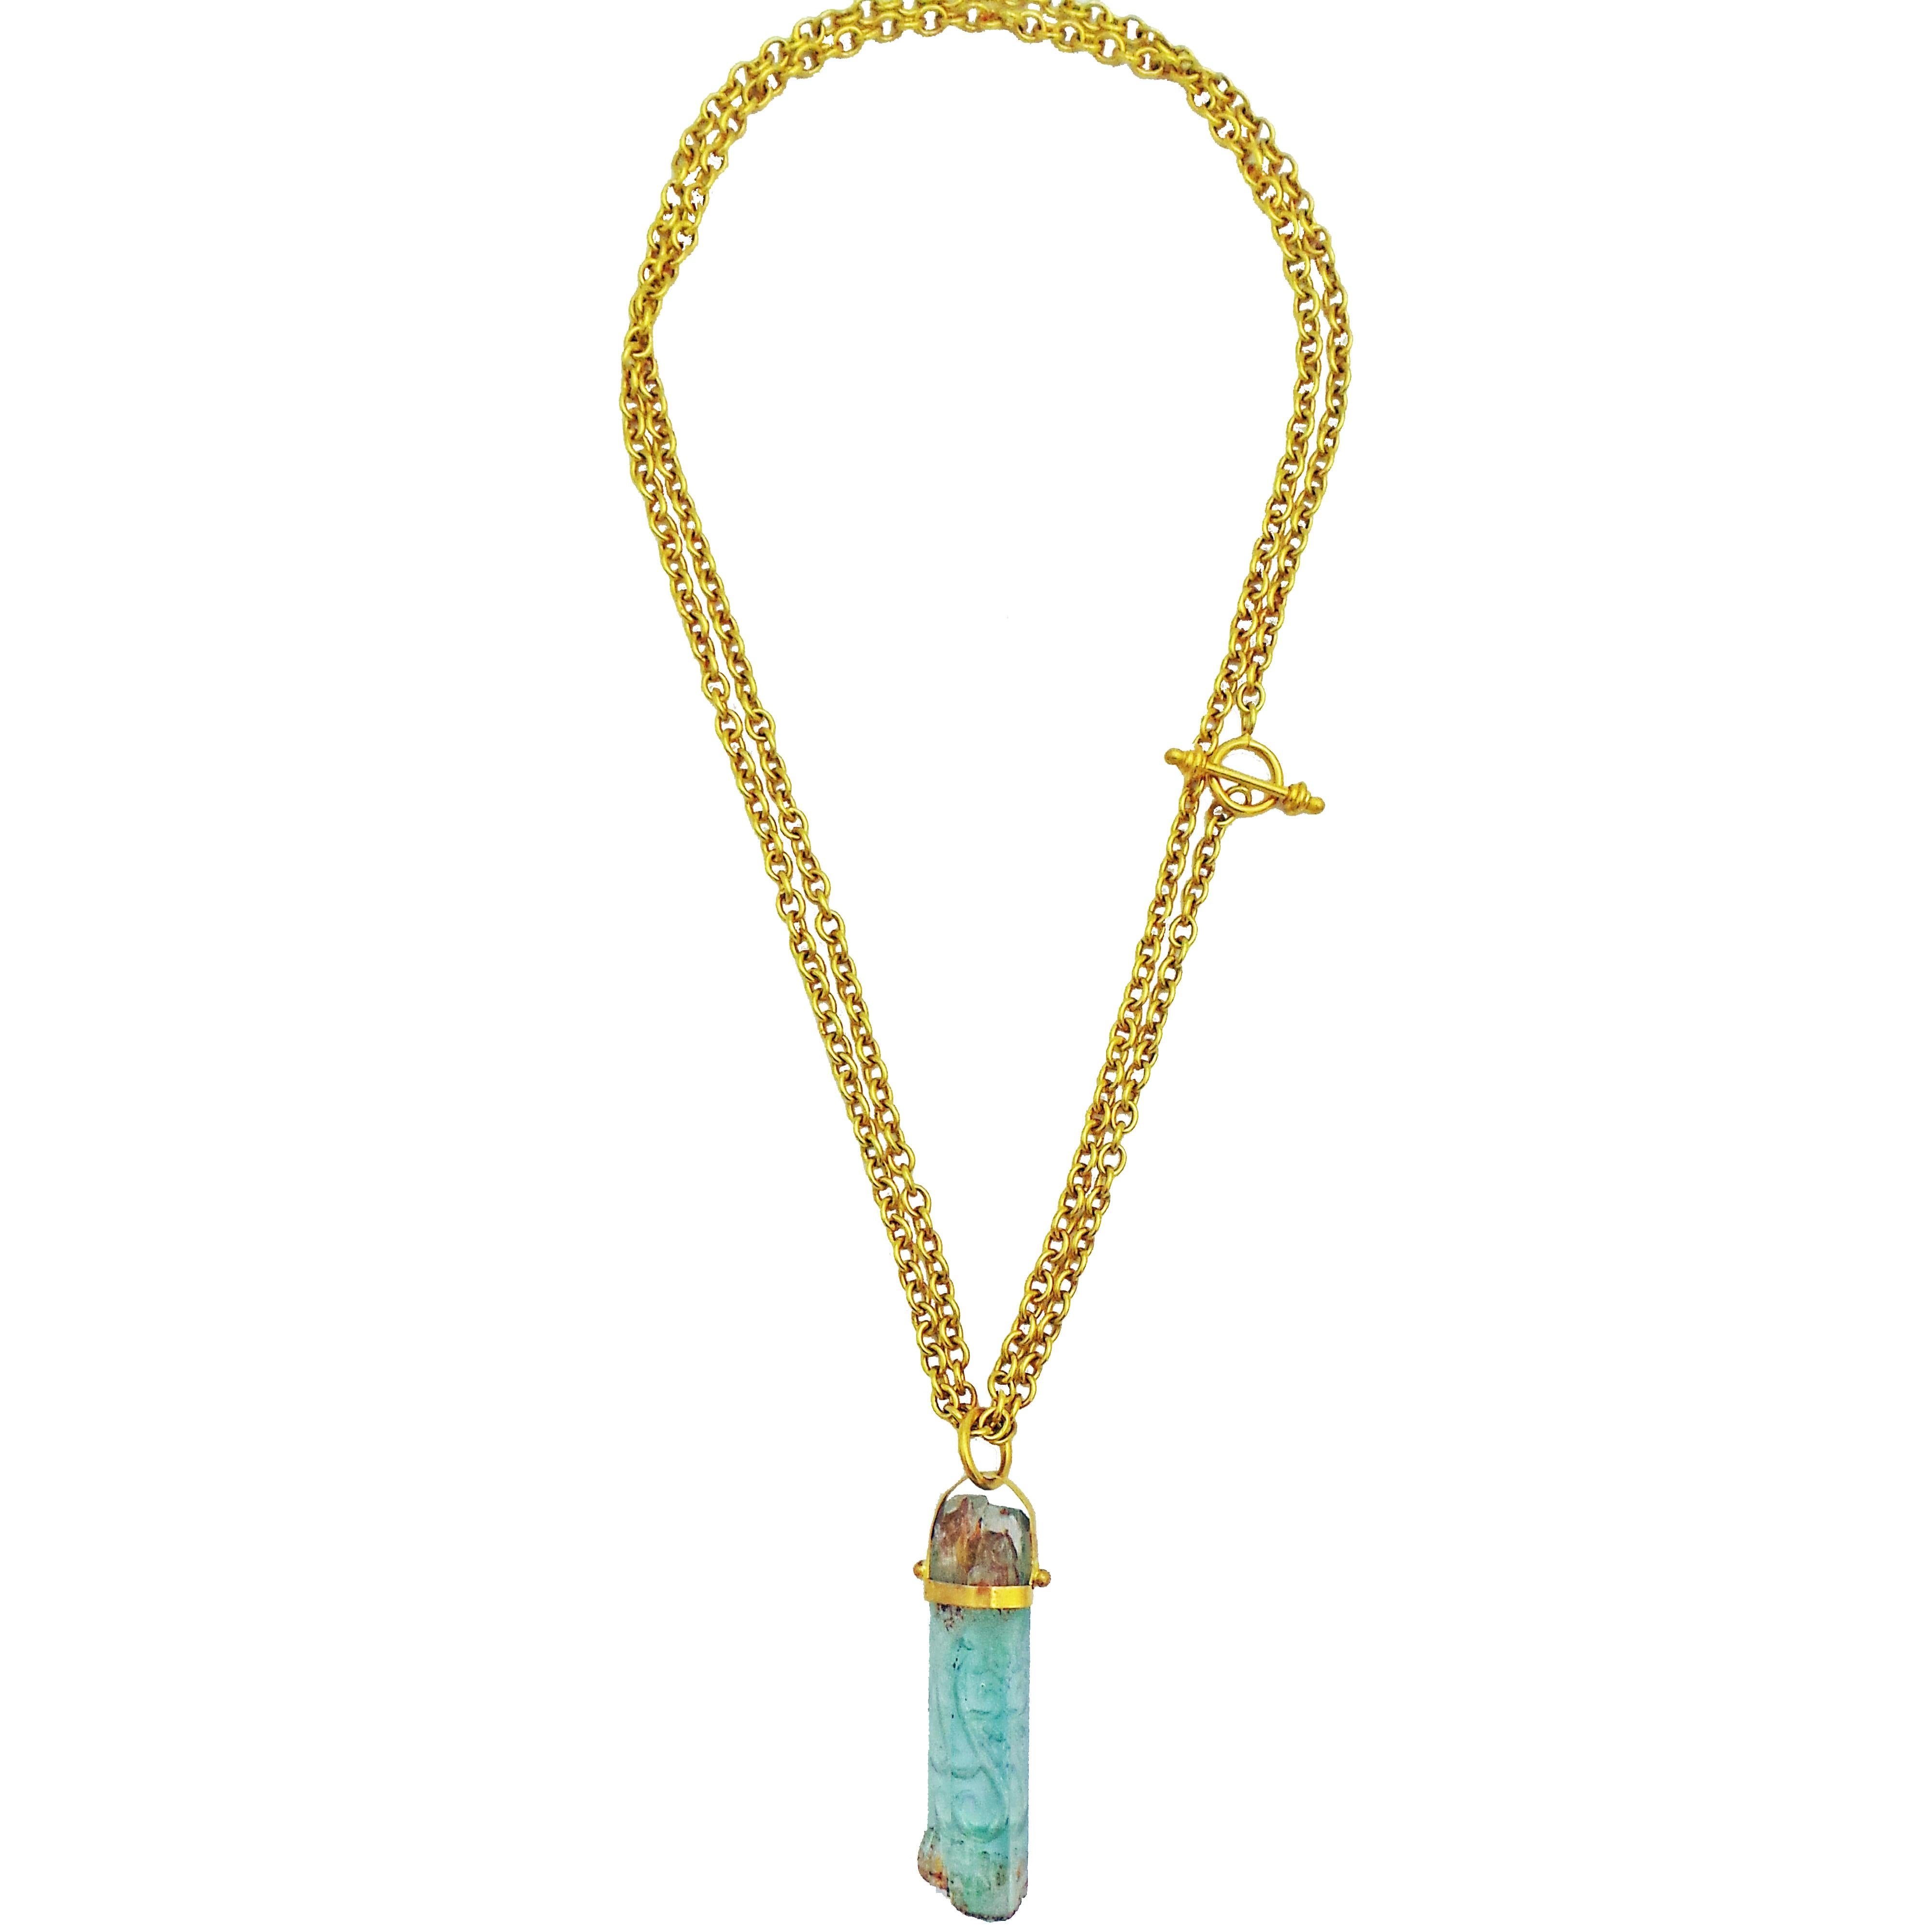 Rough Aquamarine crystal with reverse intaglio filigree vine carving set in a hand-forged 22k yellow gold pendant. Solid 22k yellow gold cable chain necklace is convertible, and can be worn long at 34 inches or doubled through the pendant's bail to